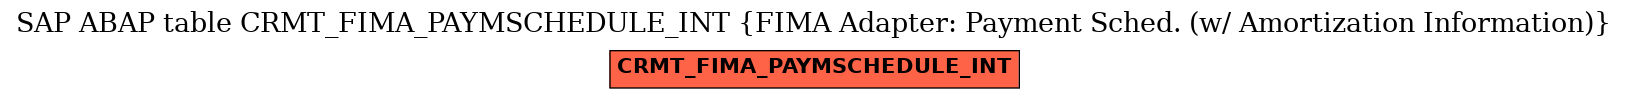 E-R Diagram for table CRMT_FIMA_PAYMSCHEDULE_INT (FIMA Adapter: Payment Sched. (w/ Amortization Information))